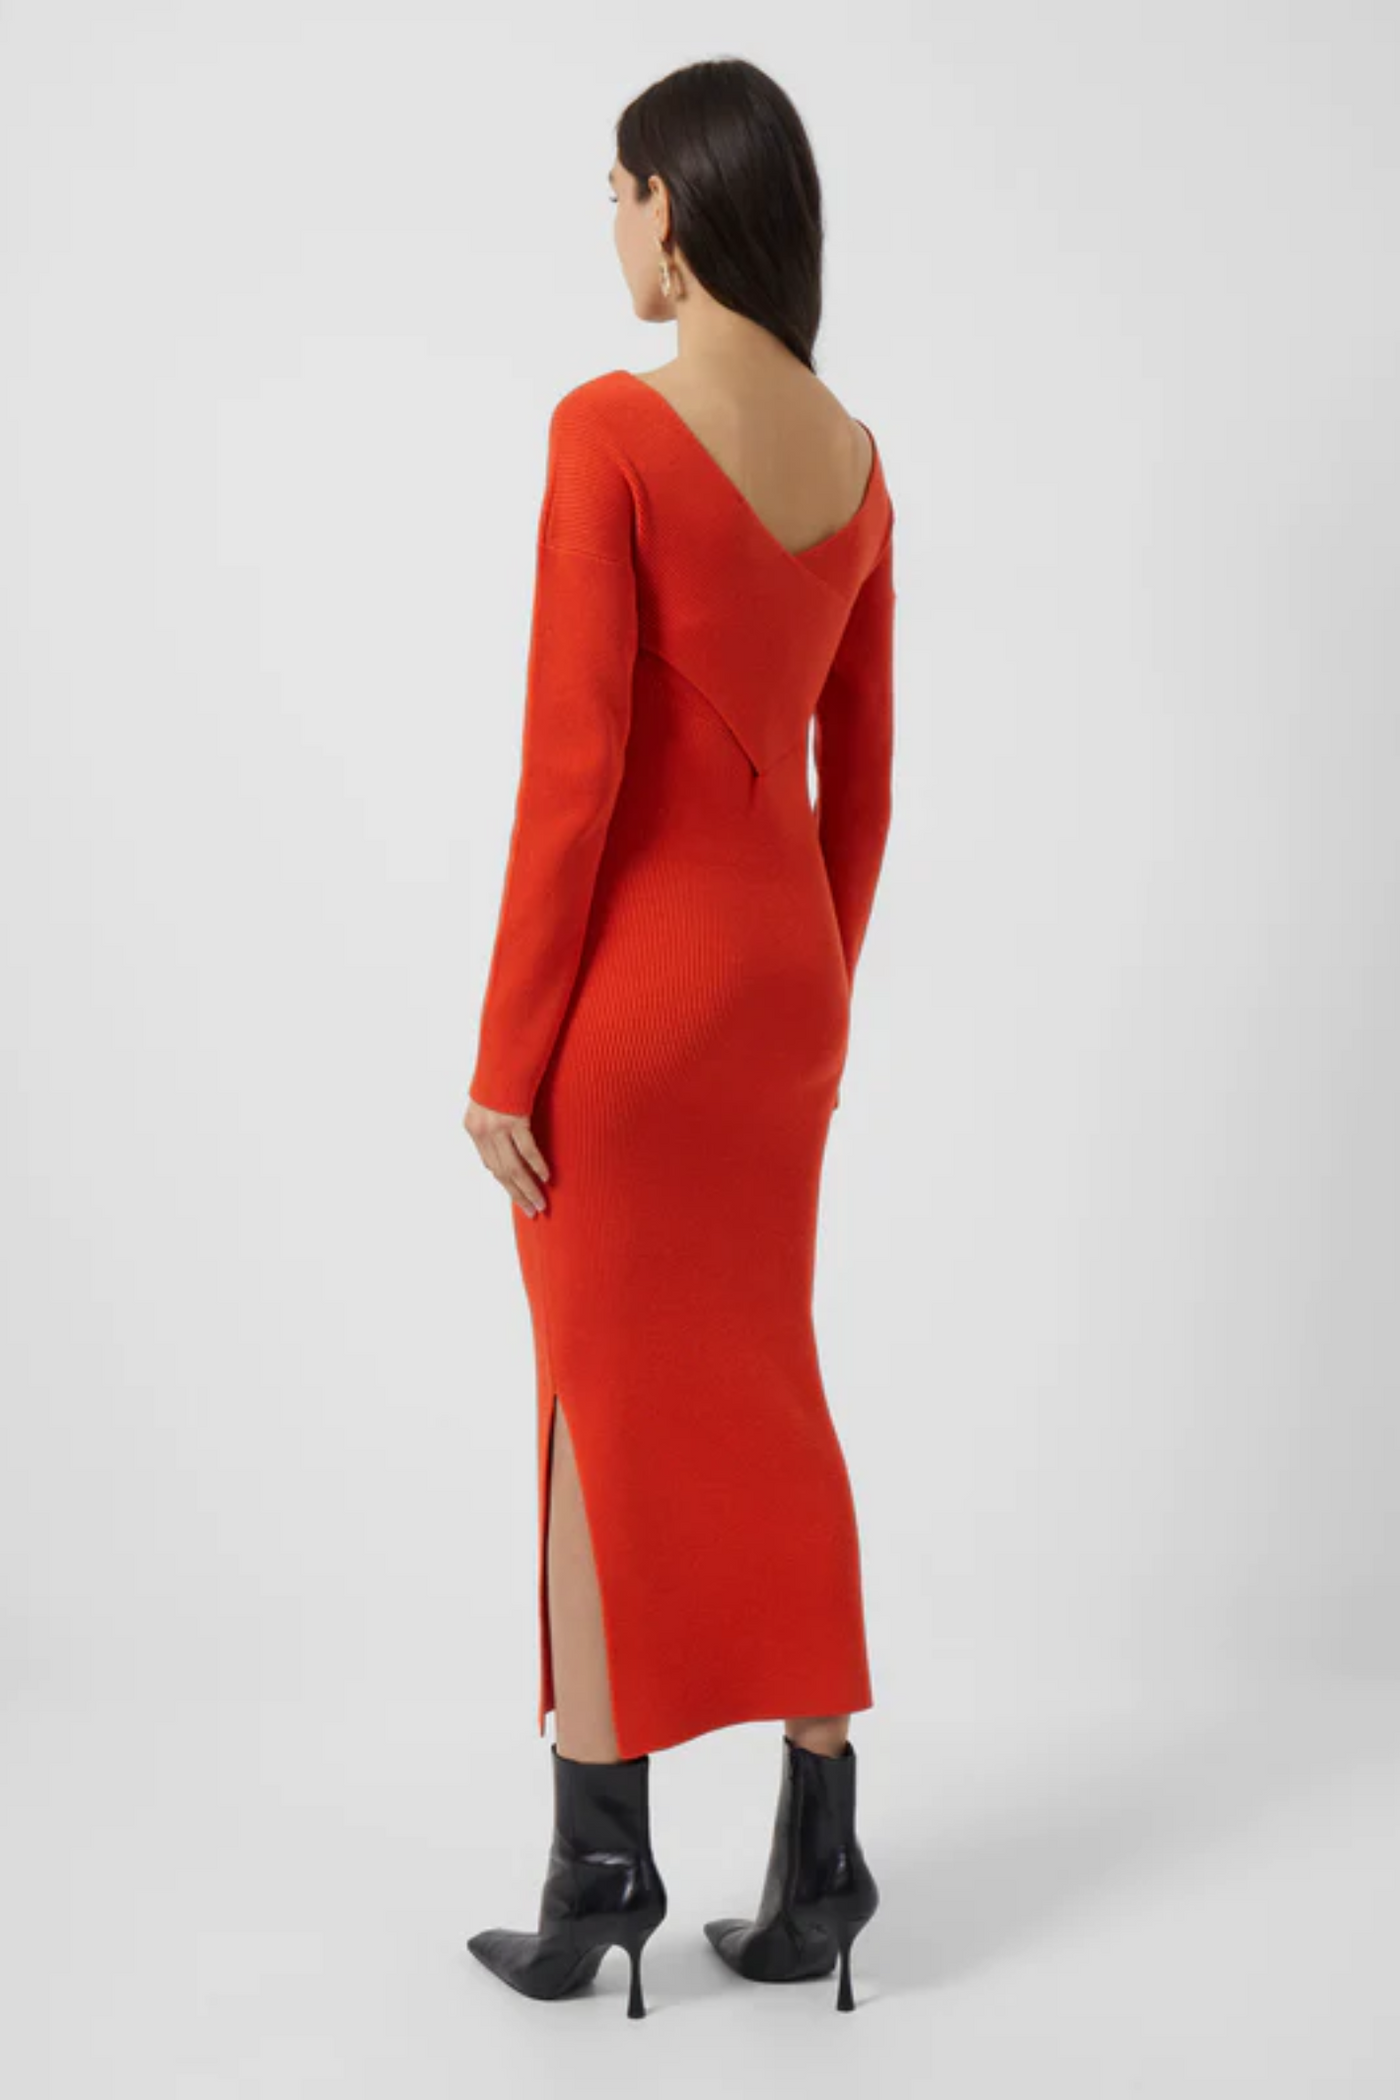 French Connection Lydia Red Knit Dress 71TDB | Jezabel Boutique